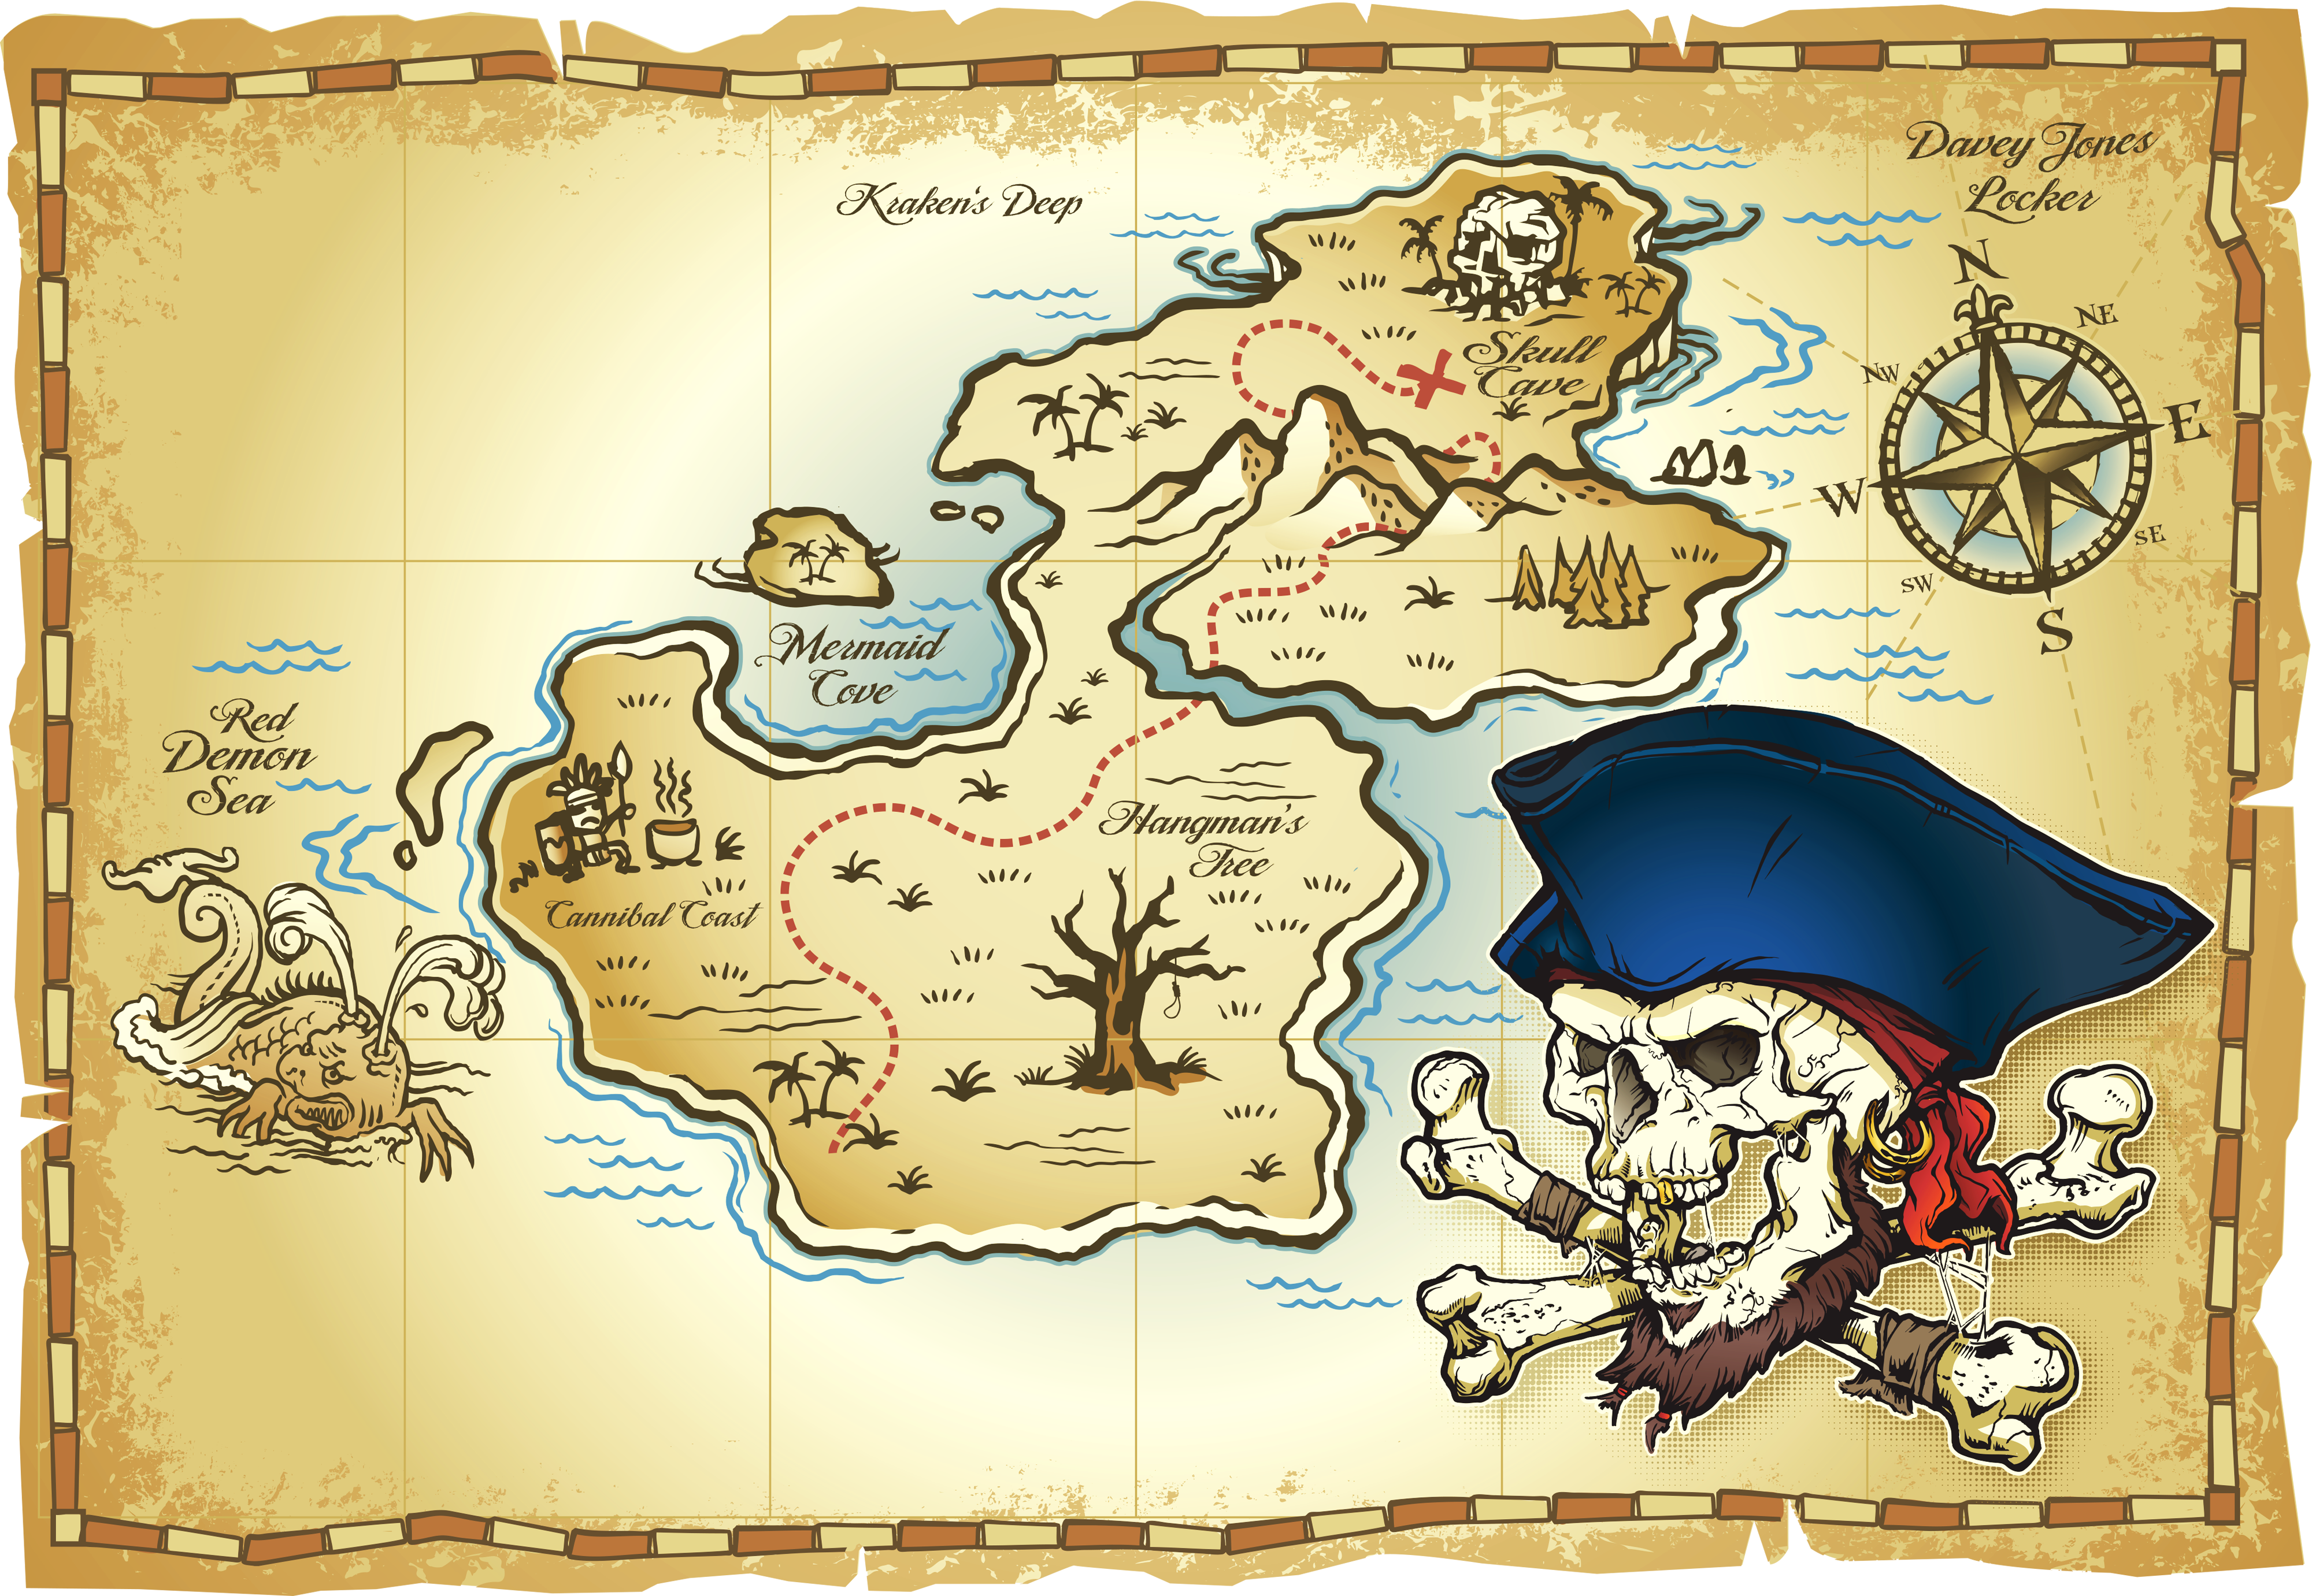 Piracy Map Treasure Buried Free HQ Image Clipart